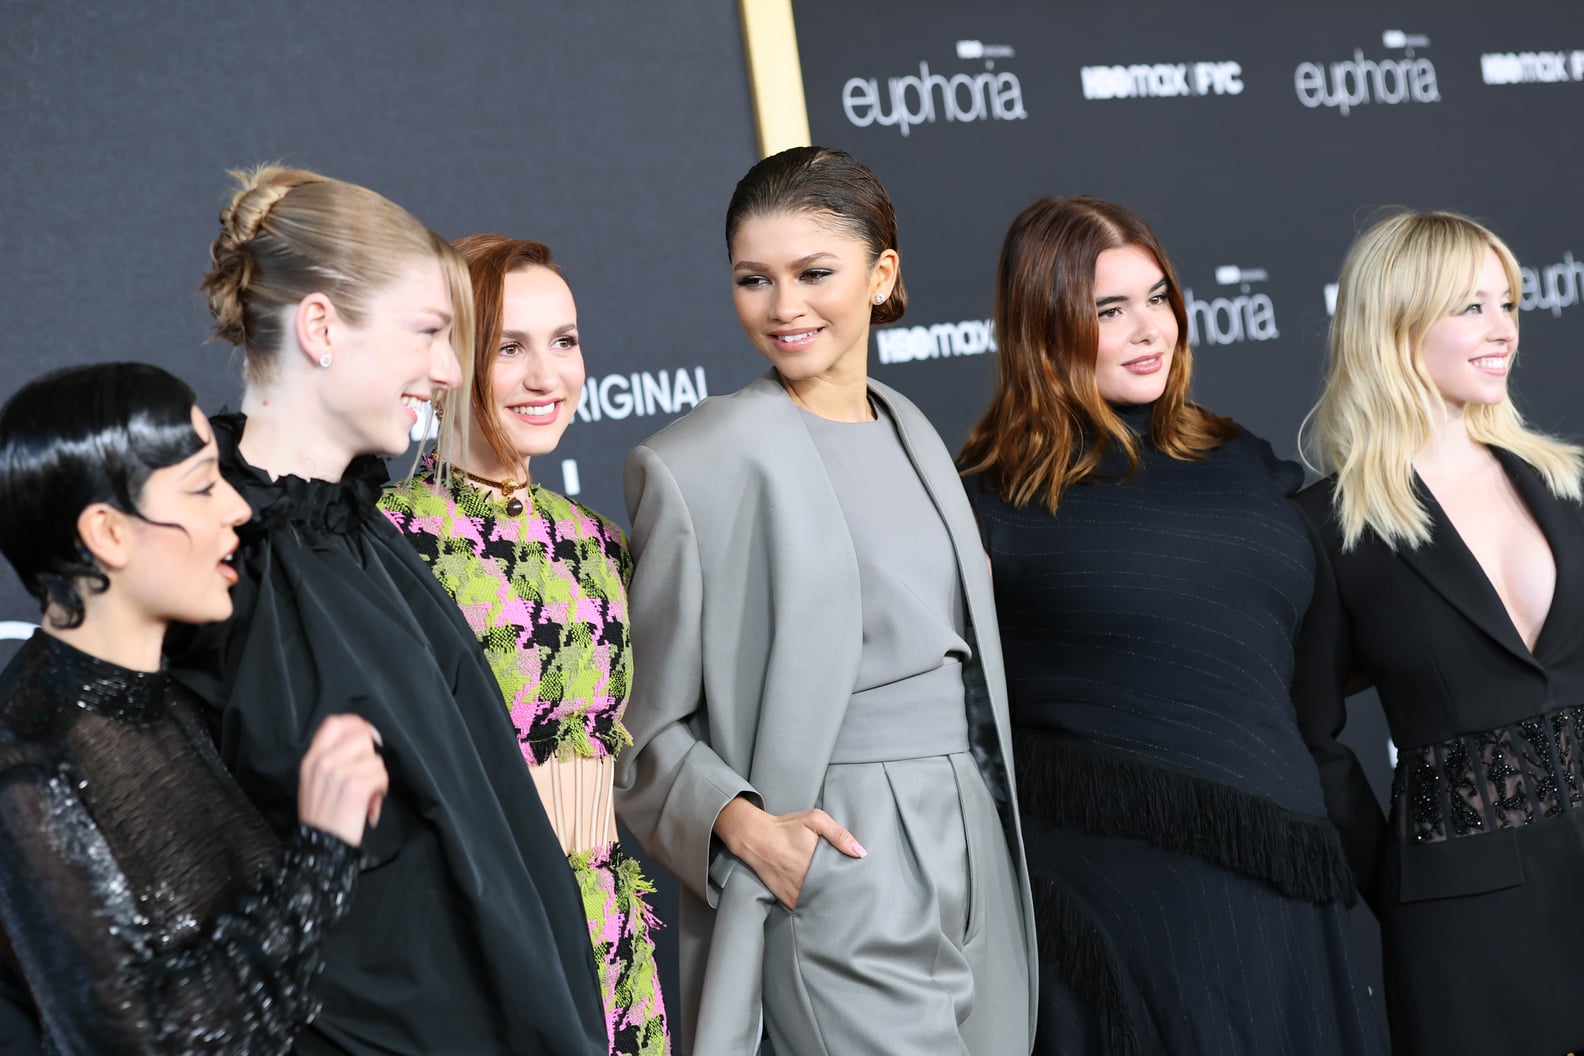 The Euphoria Cast at HBO Max's FYC Event | Pictures | POPSUGAR Celebrity